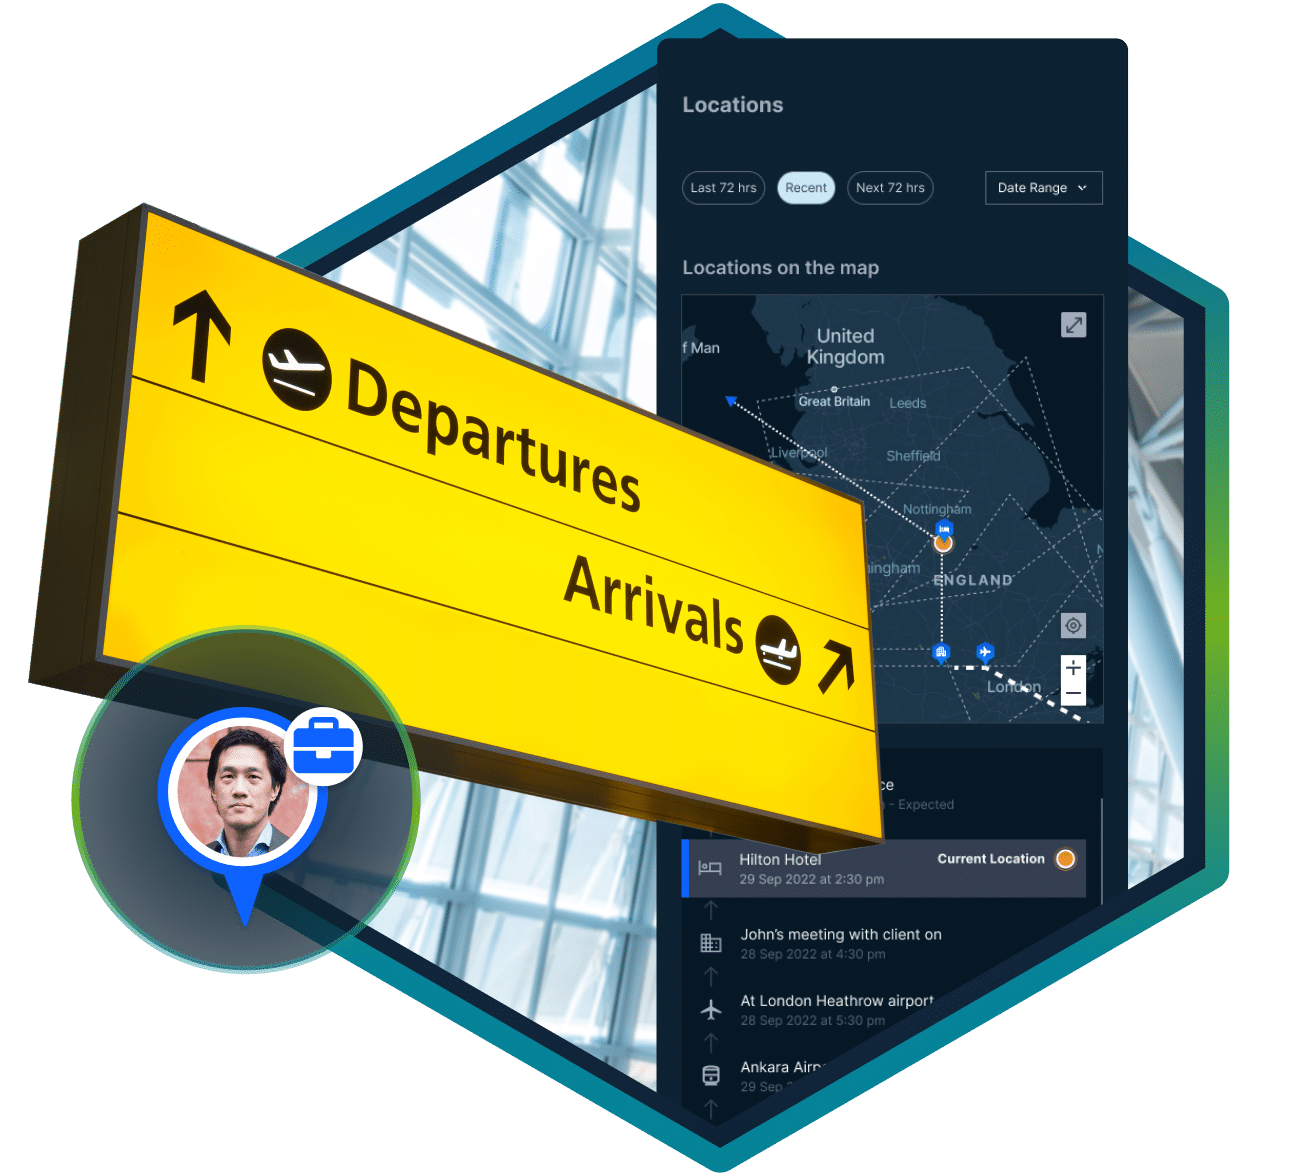 An airport 'Departures & Arrivals' sign overlayed on an image of the Restrata platform showing a travel path on a map